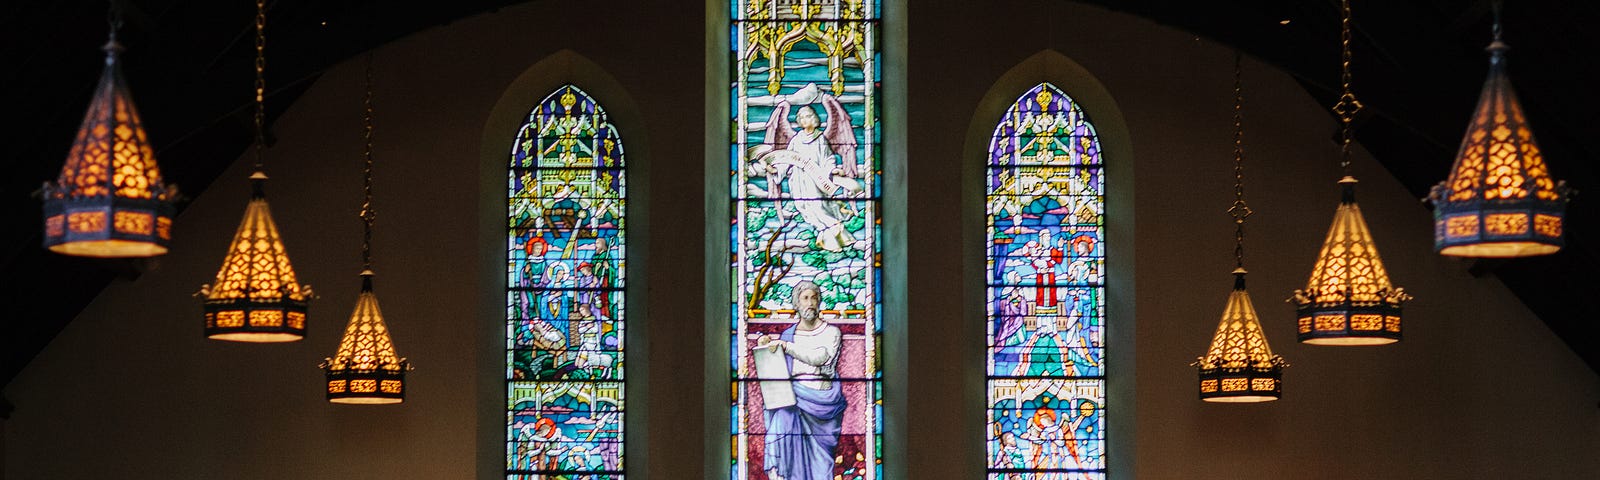 Inside view of a sanctuary with stained glass windows behind an altar